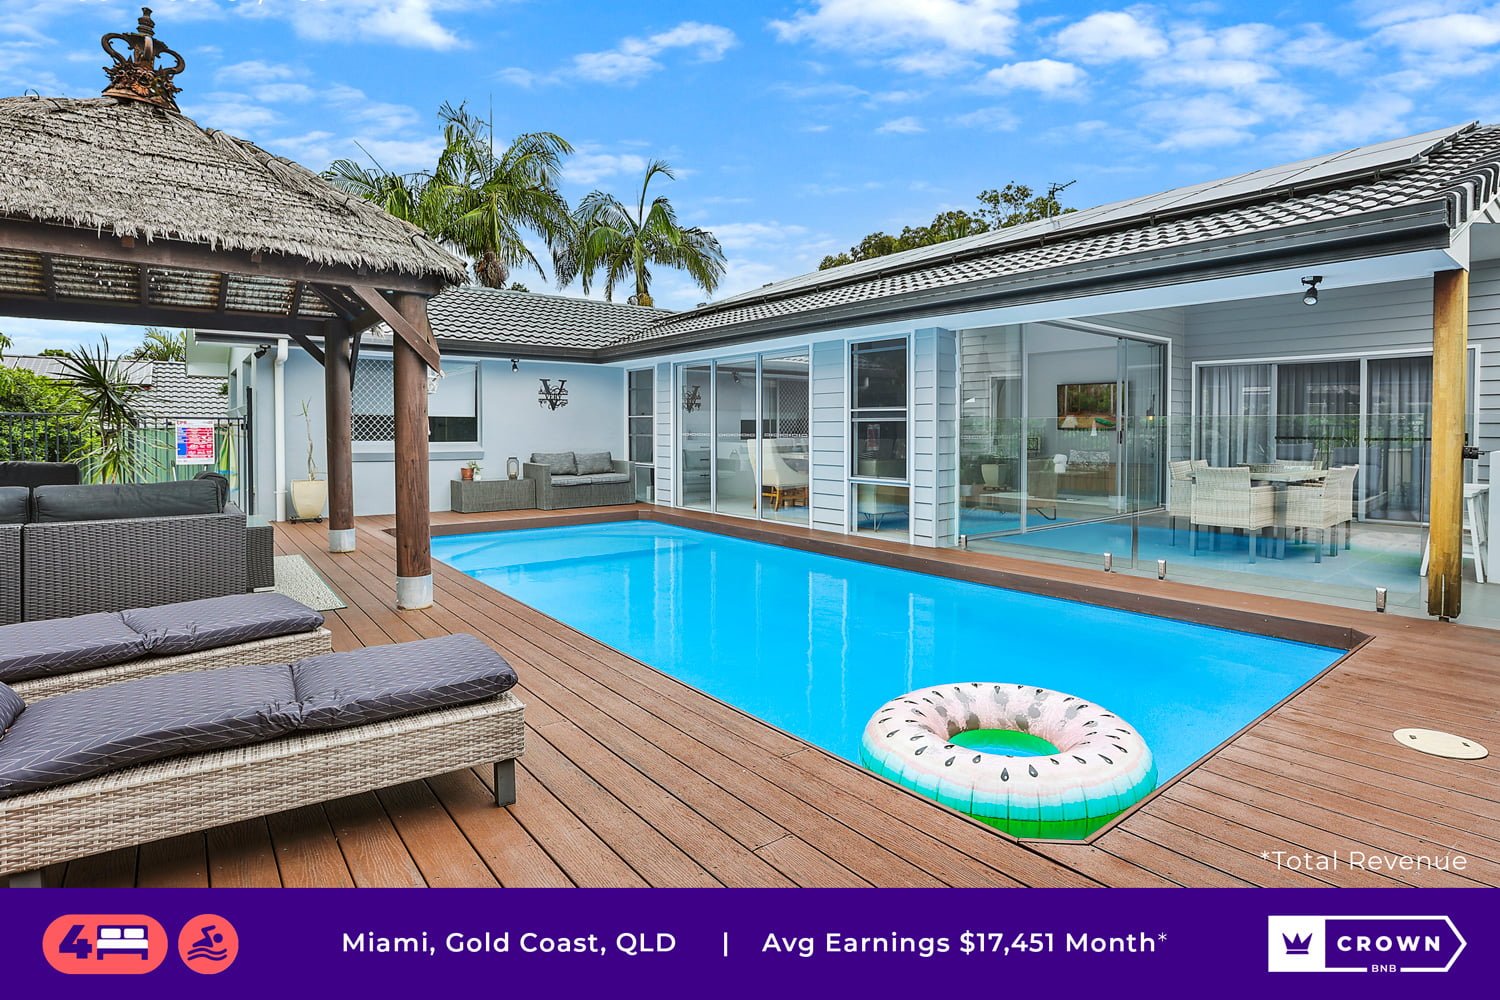 Property-results-for-Miami-4bed-Airbnb-Management-Gold-Coast-by-CrownBNB